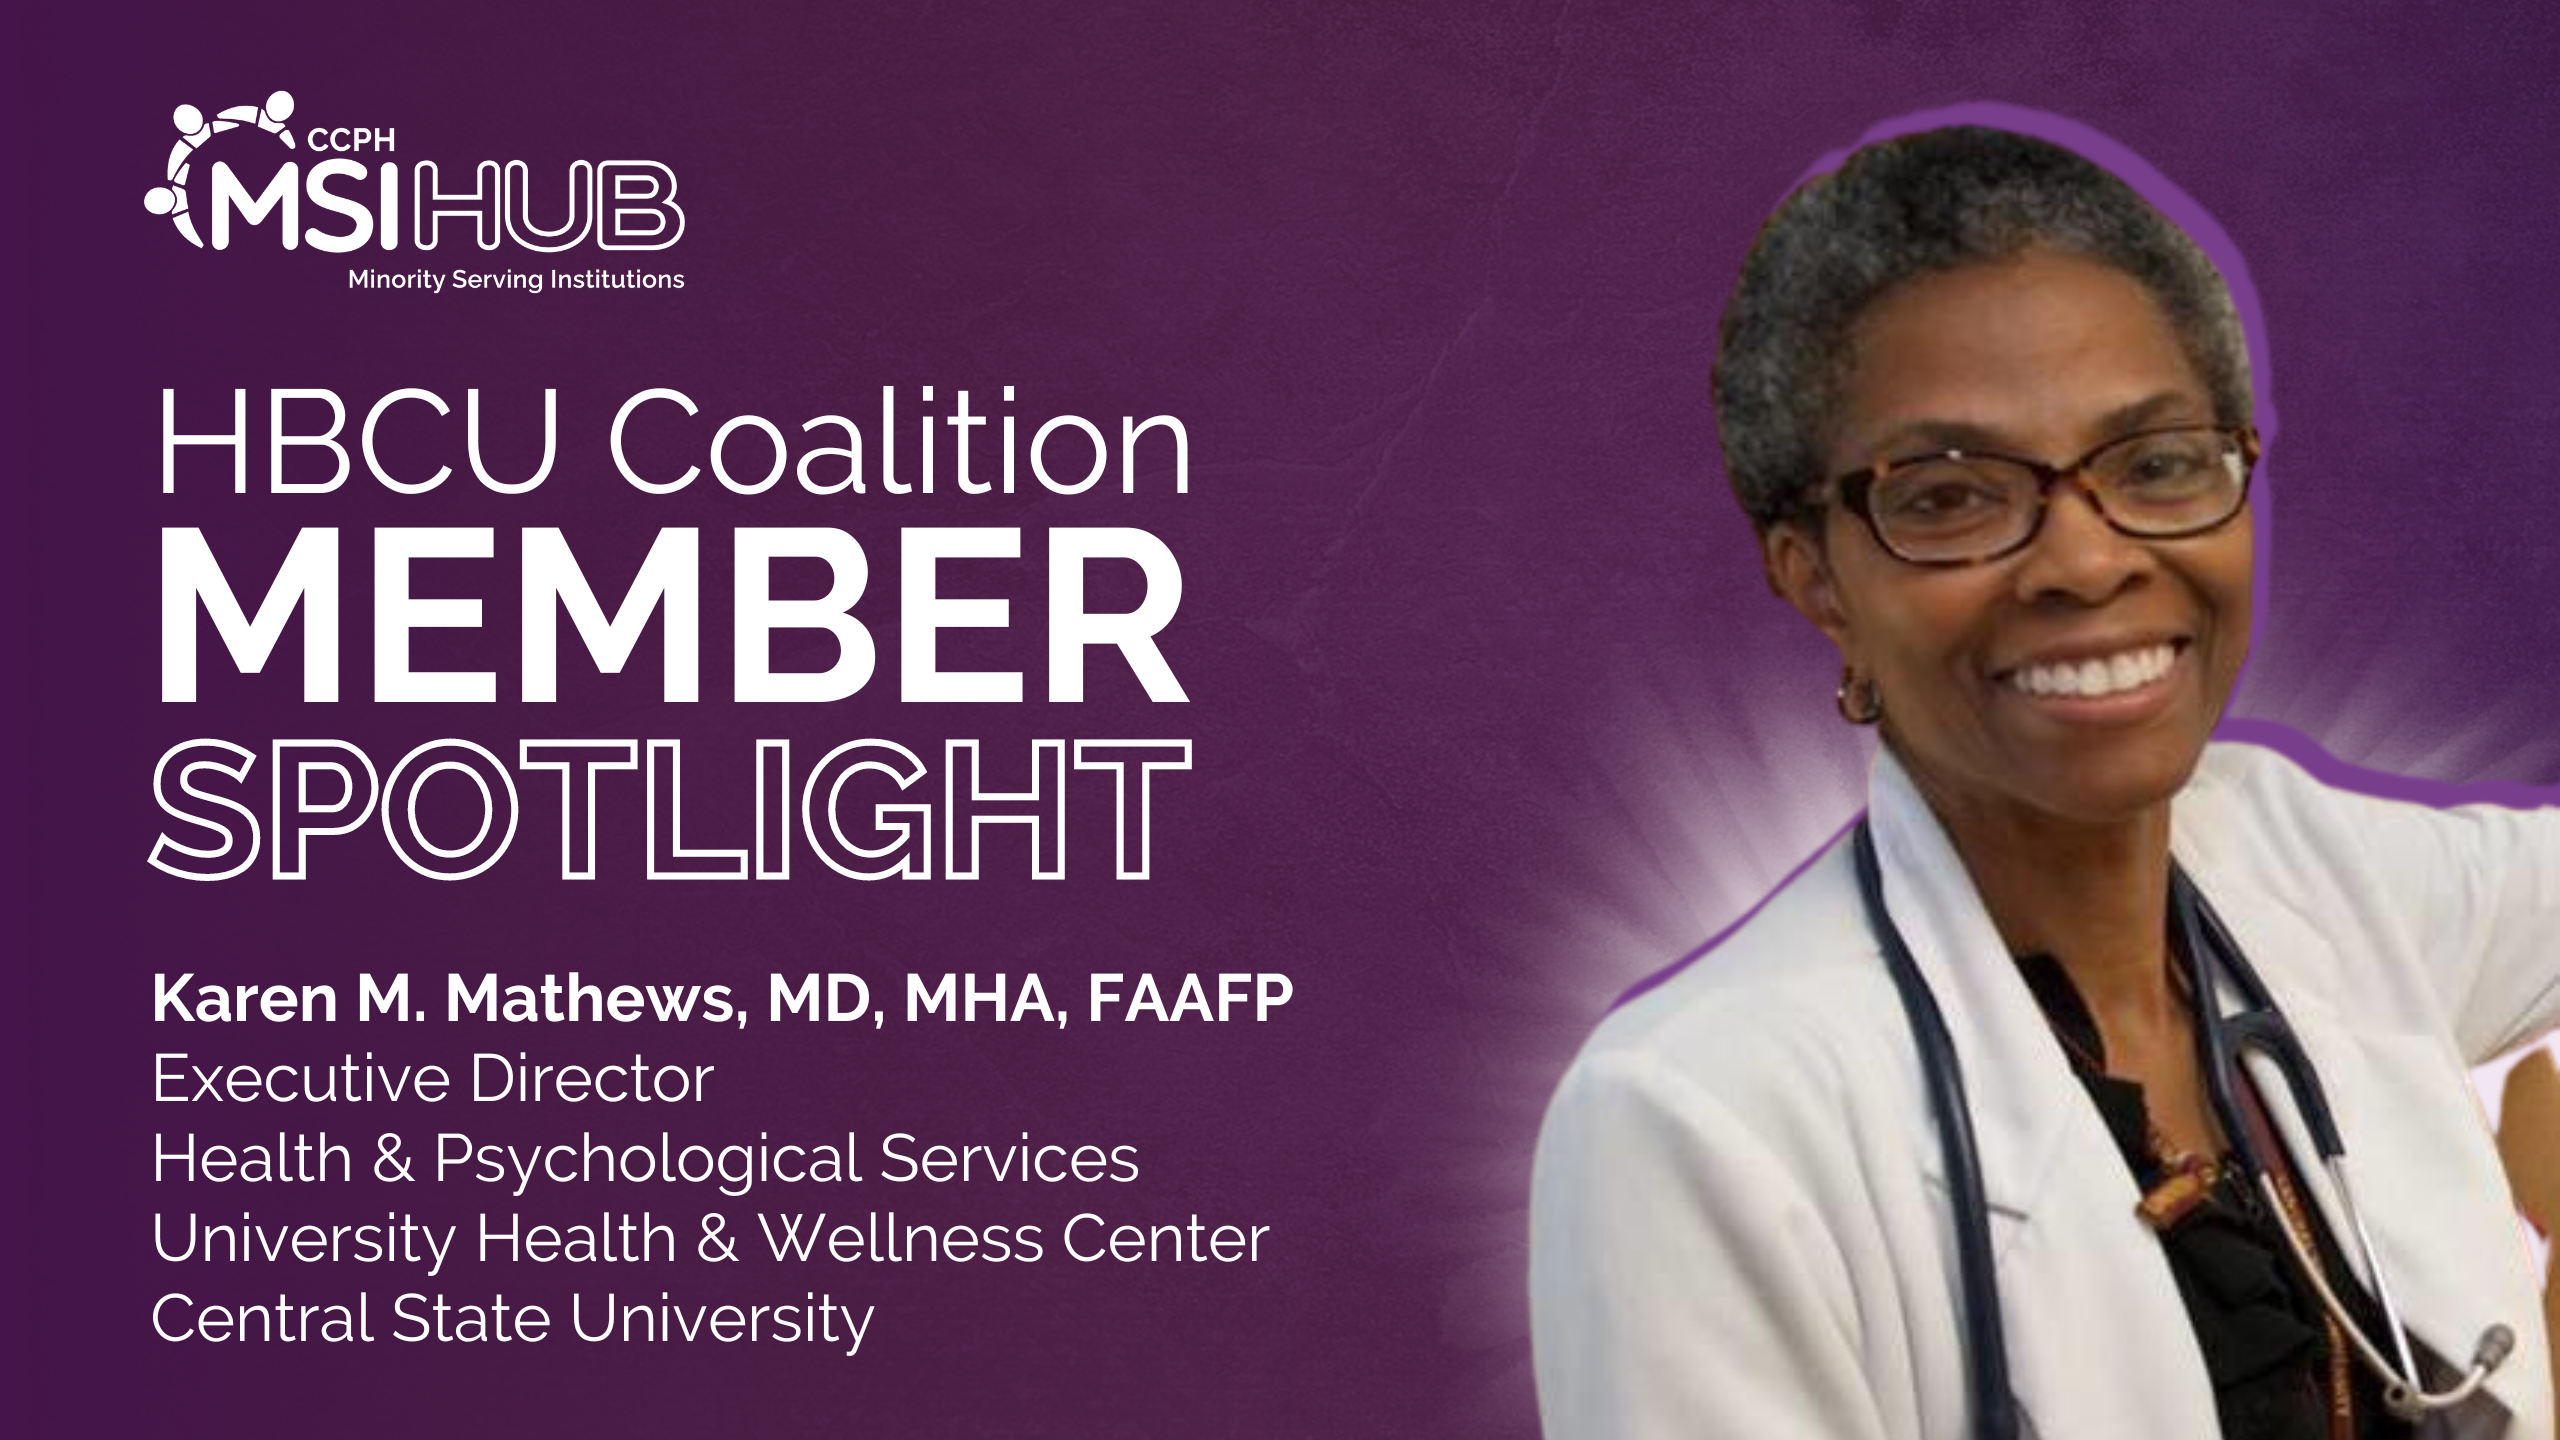 Purple background banner with white text that says 'HBCU Coalition Member Spotlight' in large white with a picture of Karen Mathews on the right